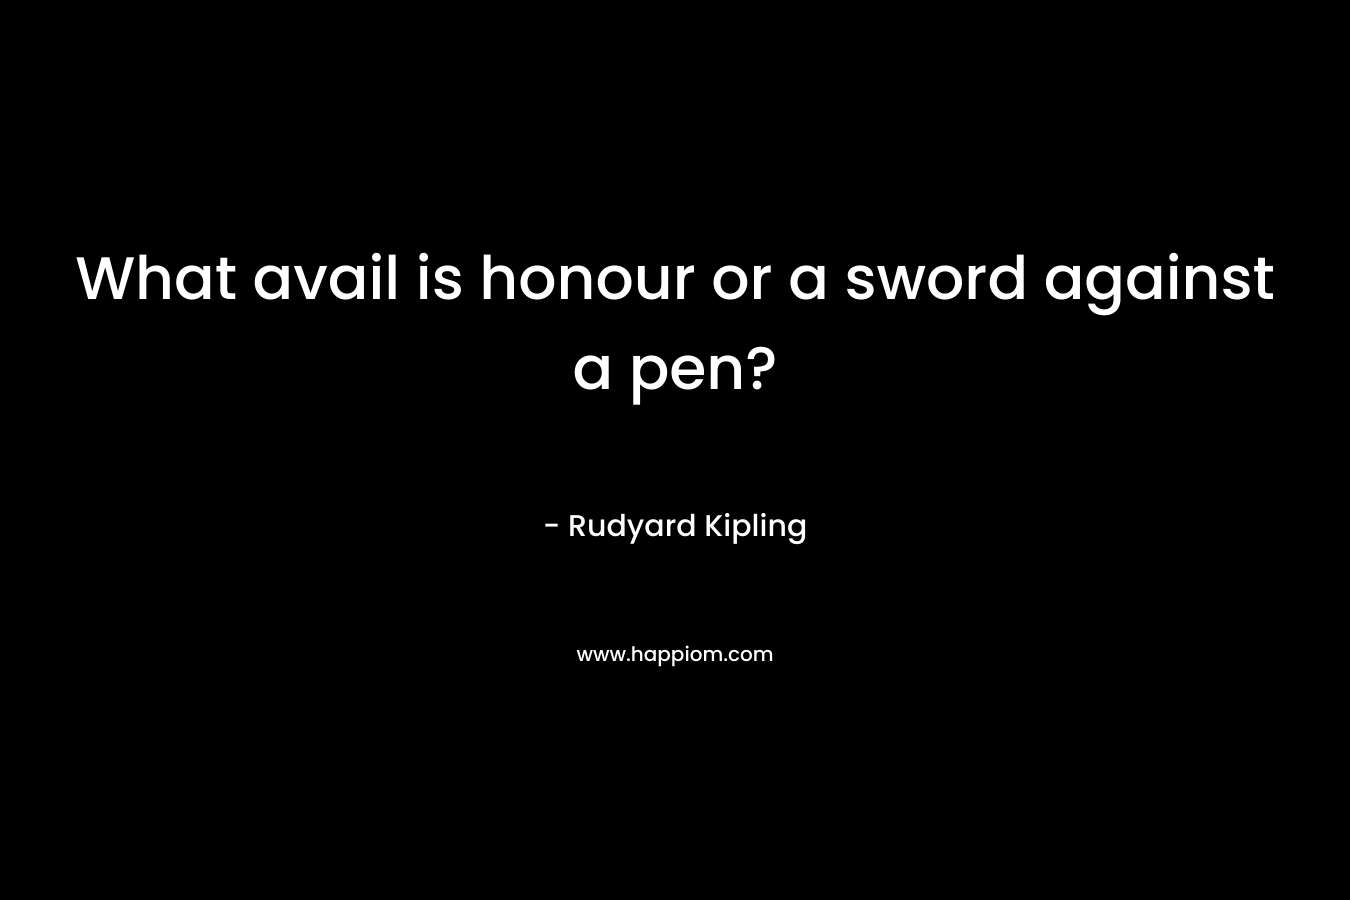 What avail is honour or a sword against a pen?